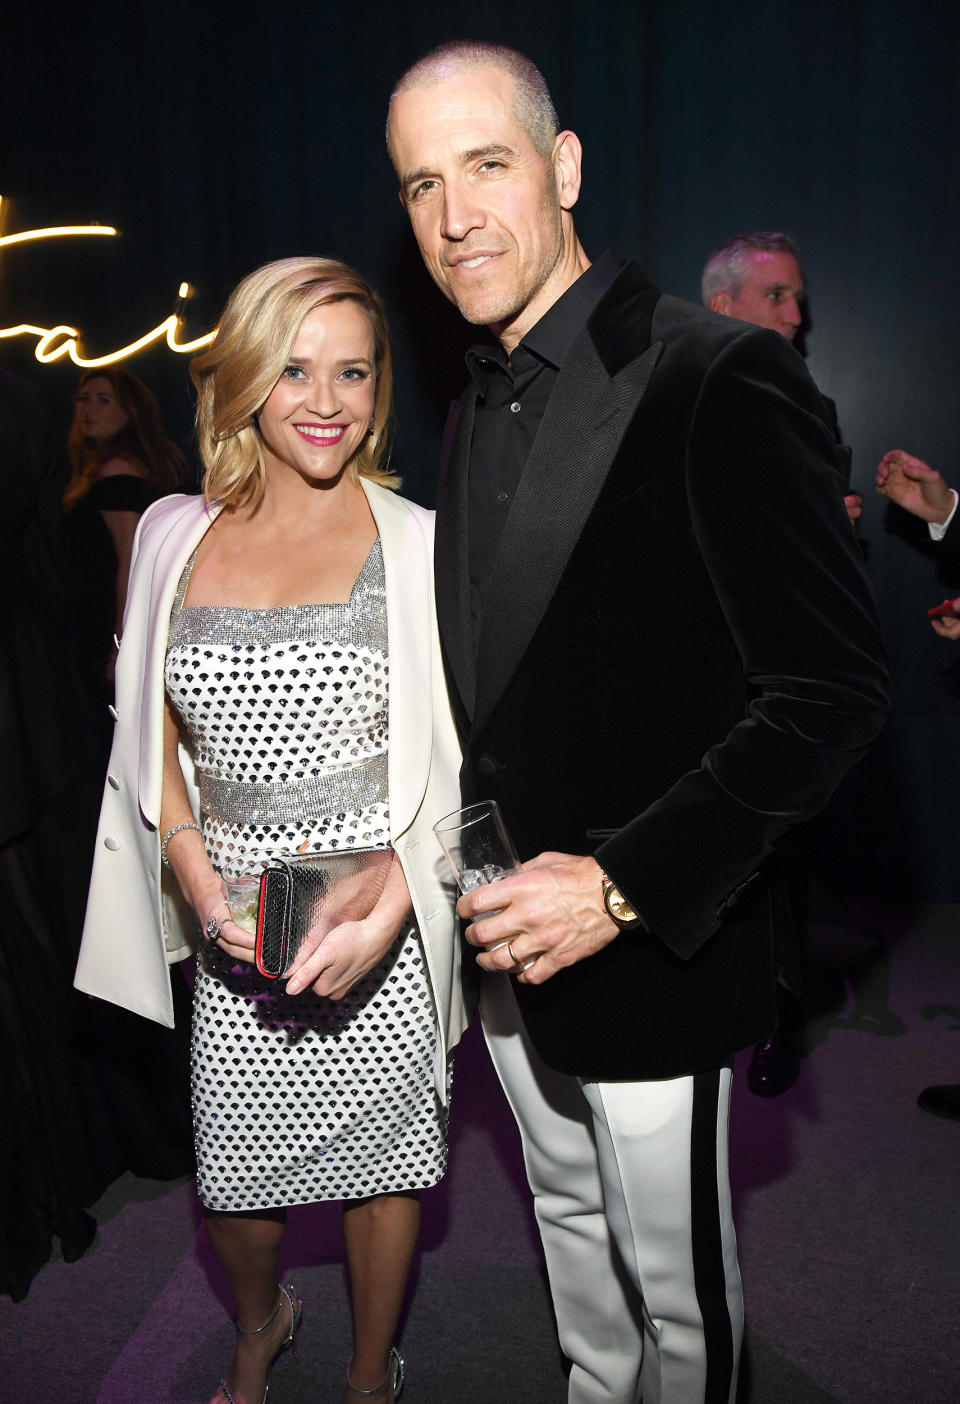 Reese Witherspoon and Jim Toth  (Kevin Mazur / WireImage)